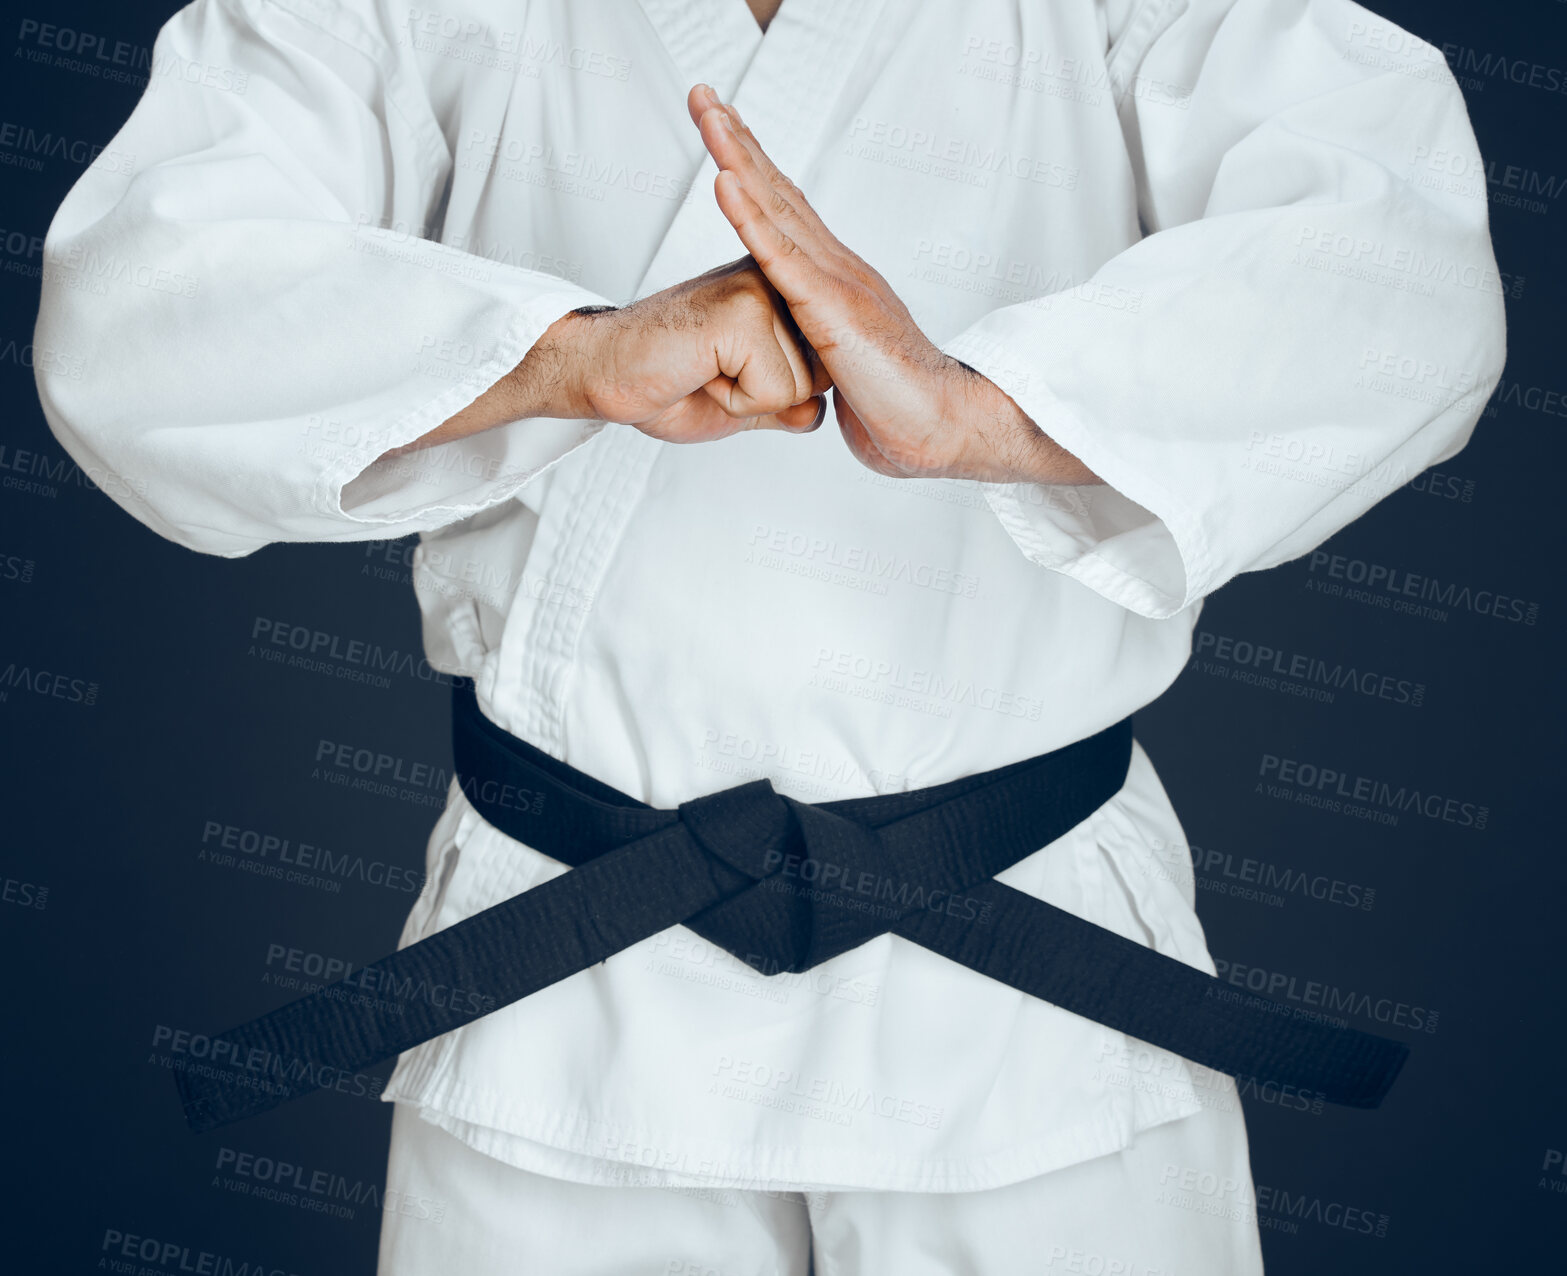 Buy stock photo Cropped shot of an unrecognizable male martial artist practicing karate in studio against a dark background